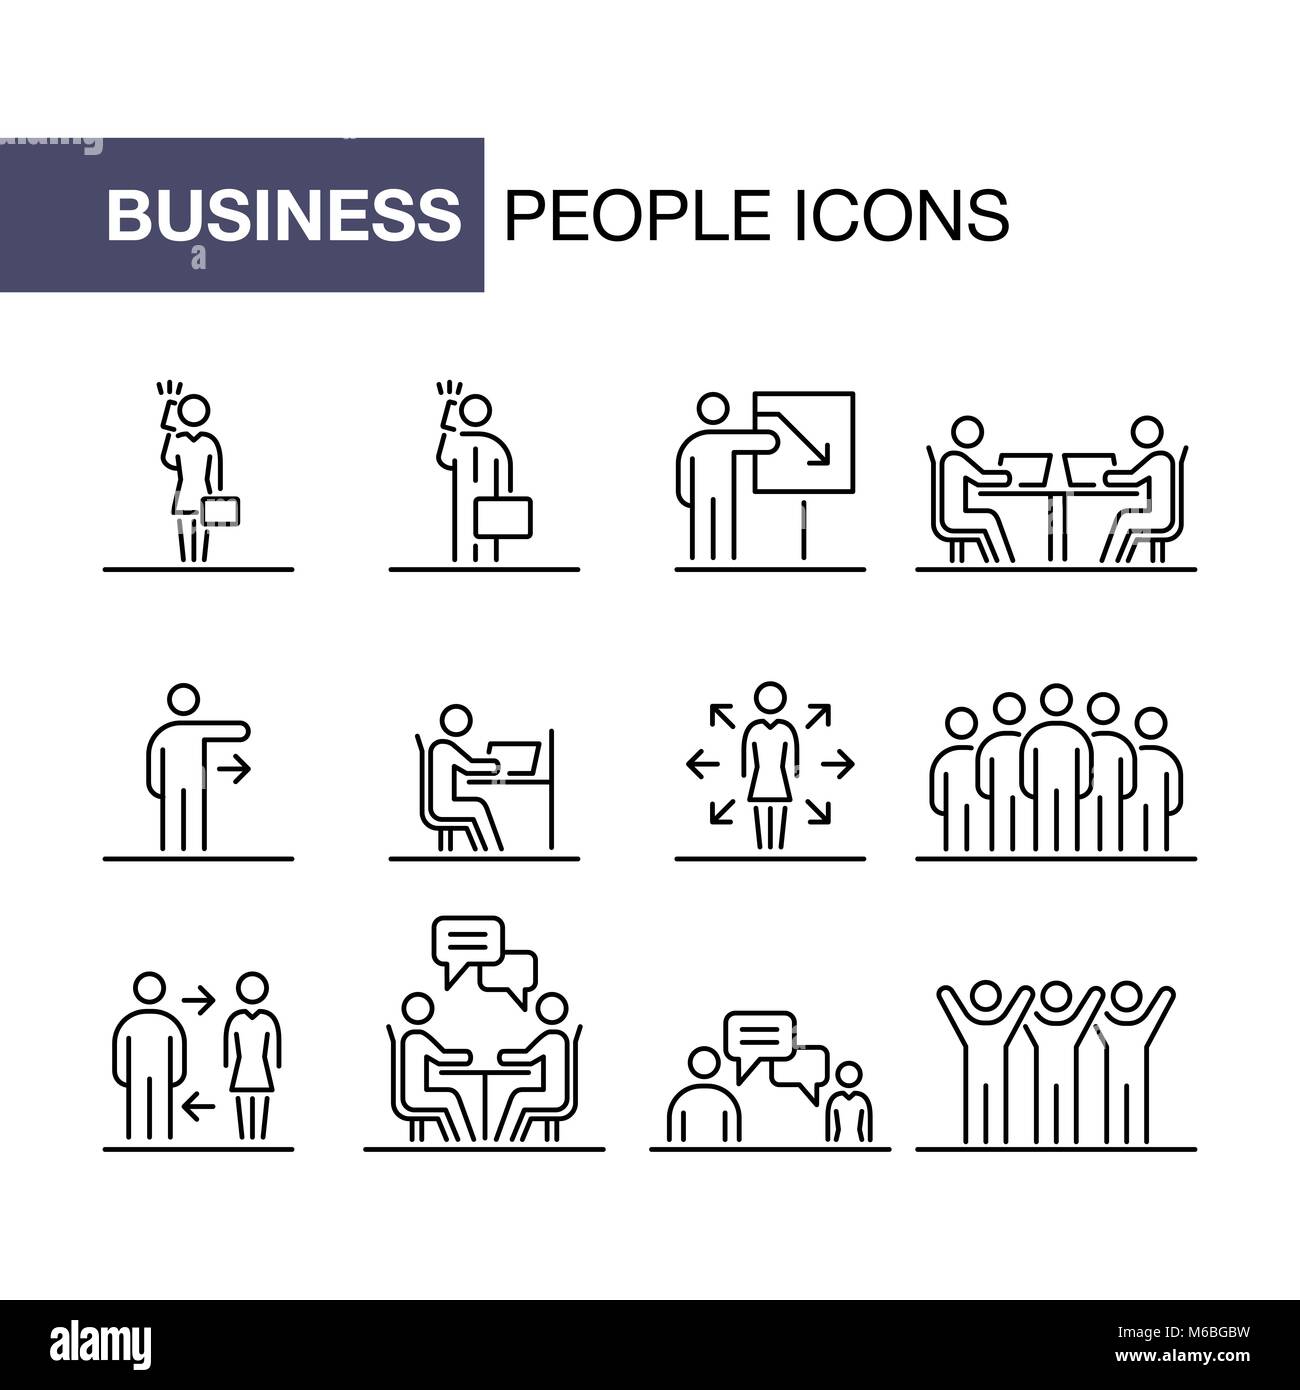 Business People Icons Set Simple Line Flat Illustration Stock Vector